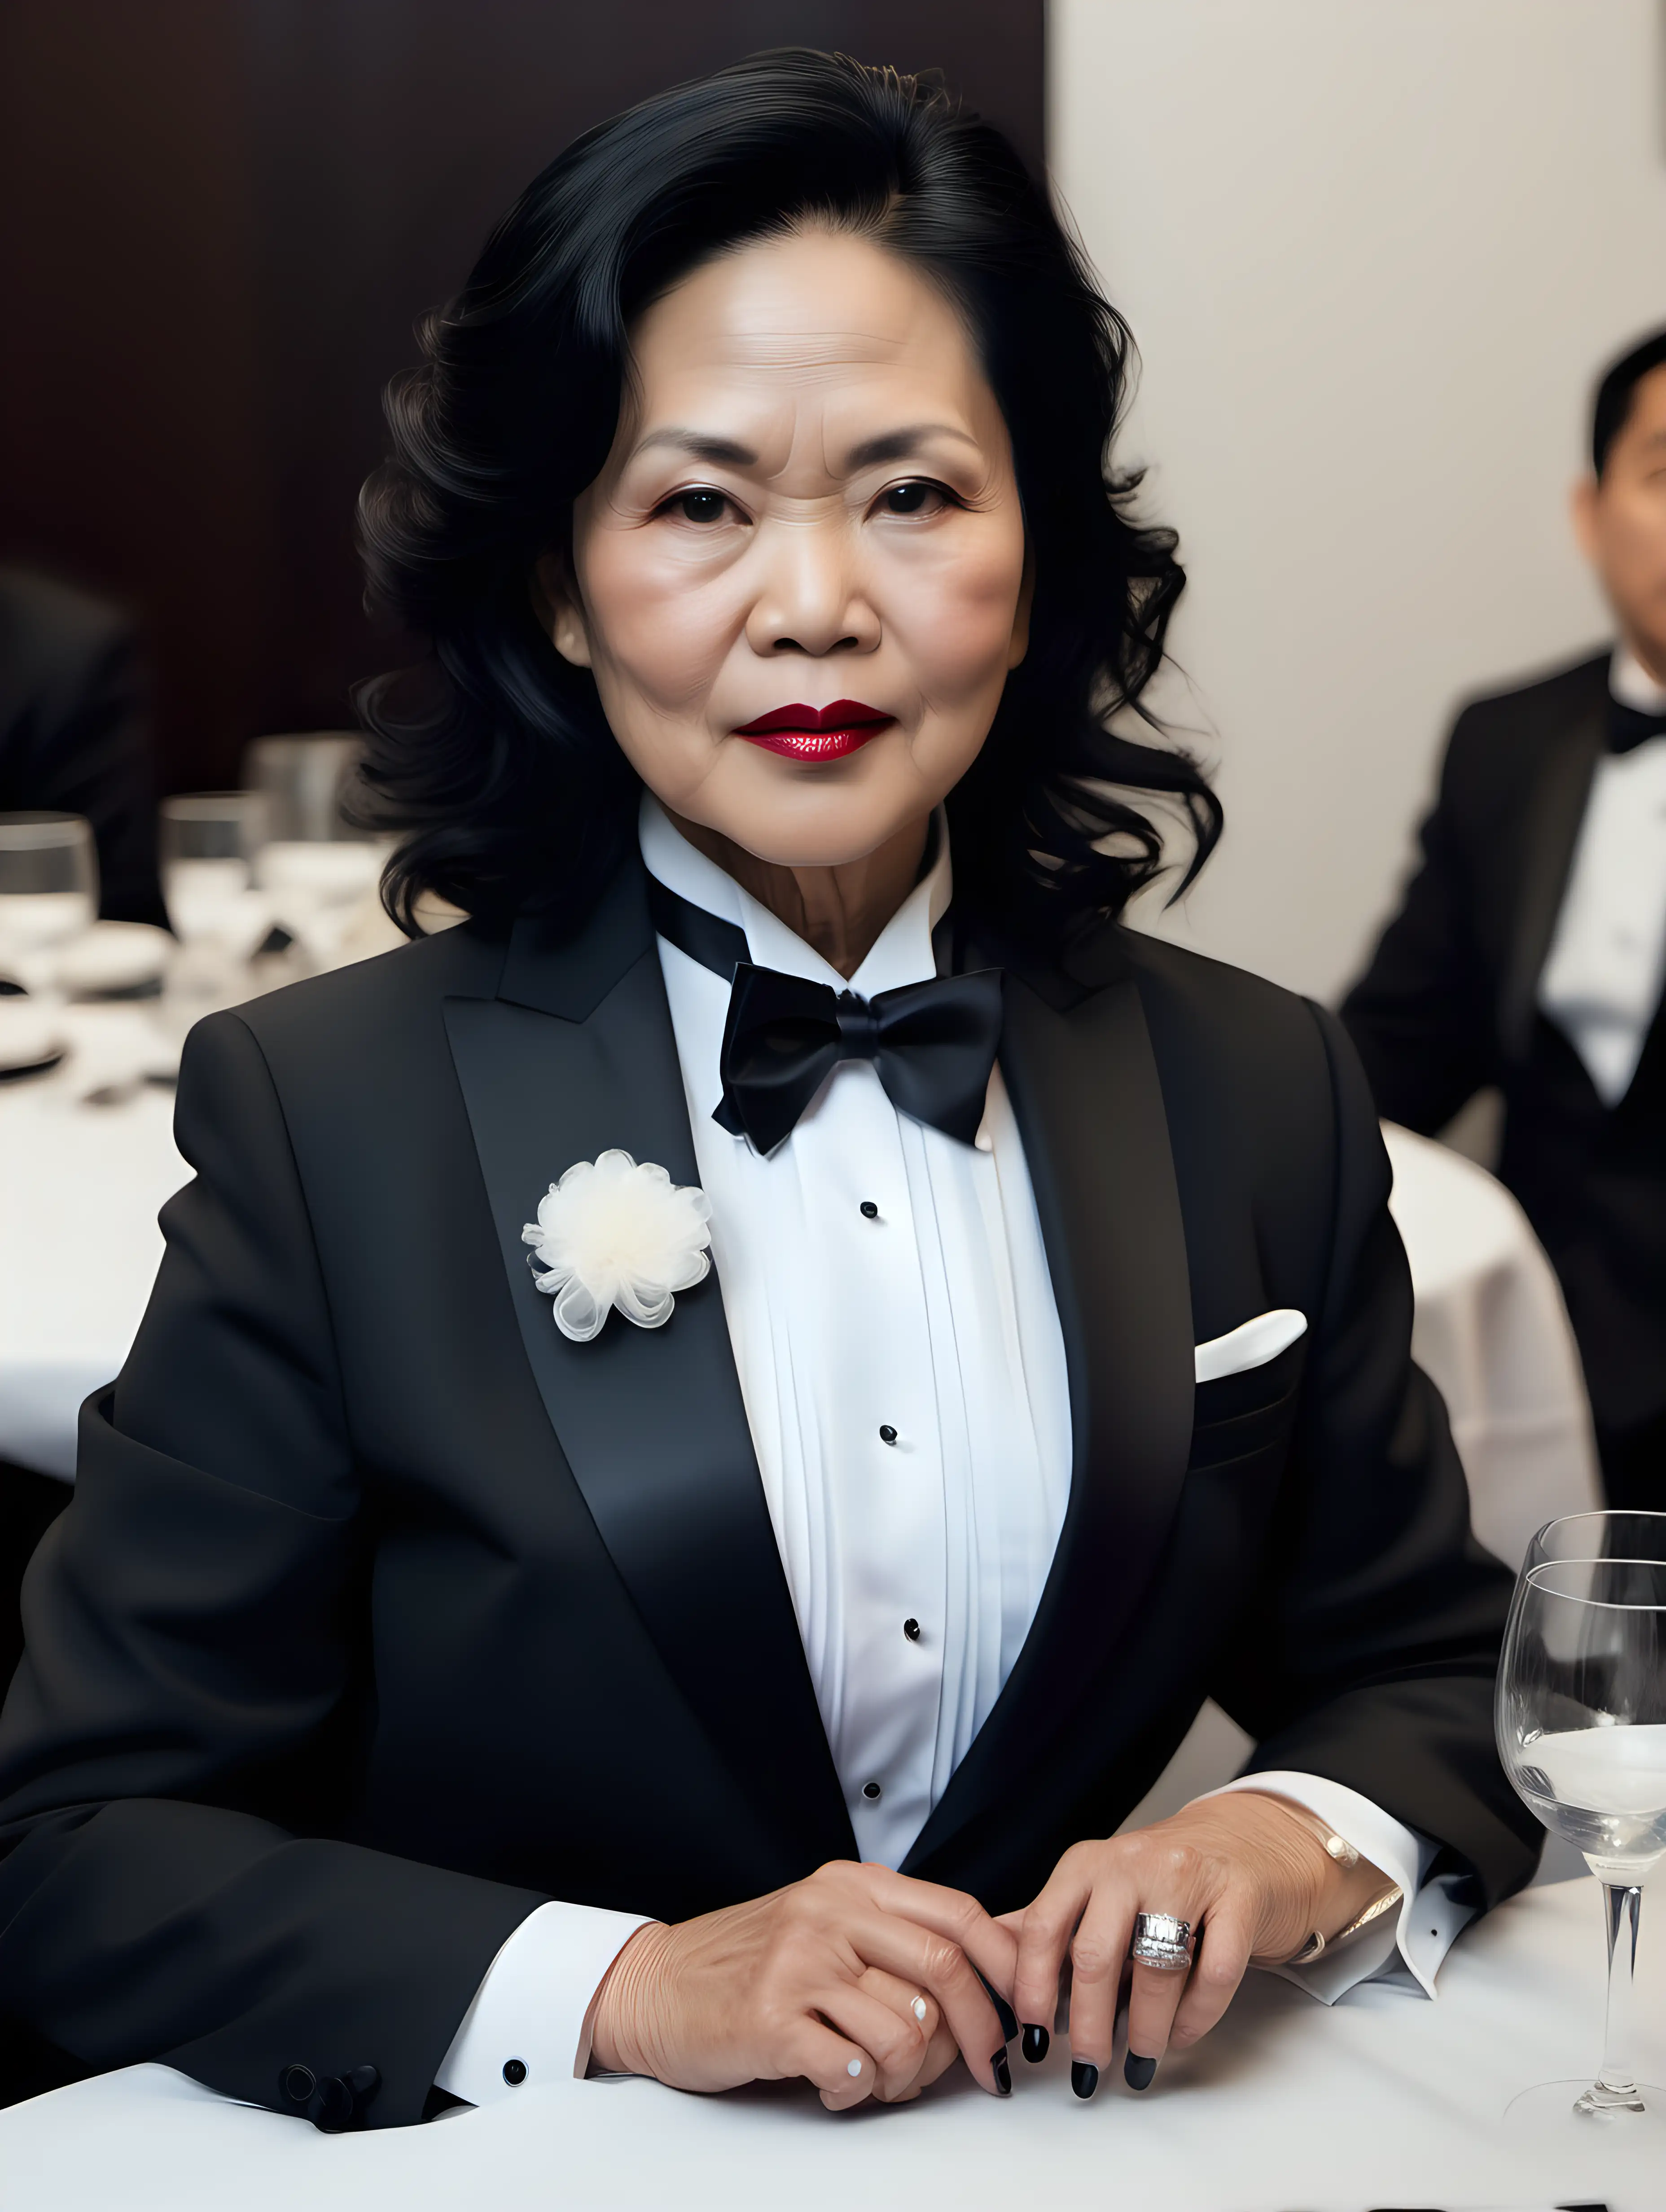 Sophisticated-Vietnamese-Woman-in-Tuxedo-with-Corsage-at-Dinner-Table